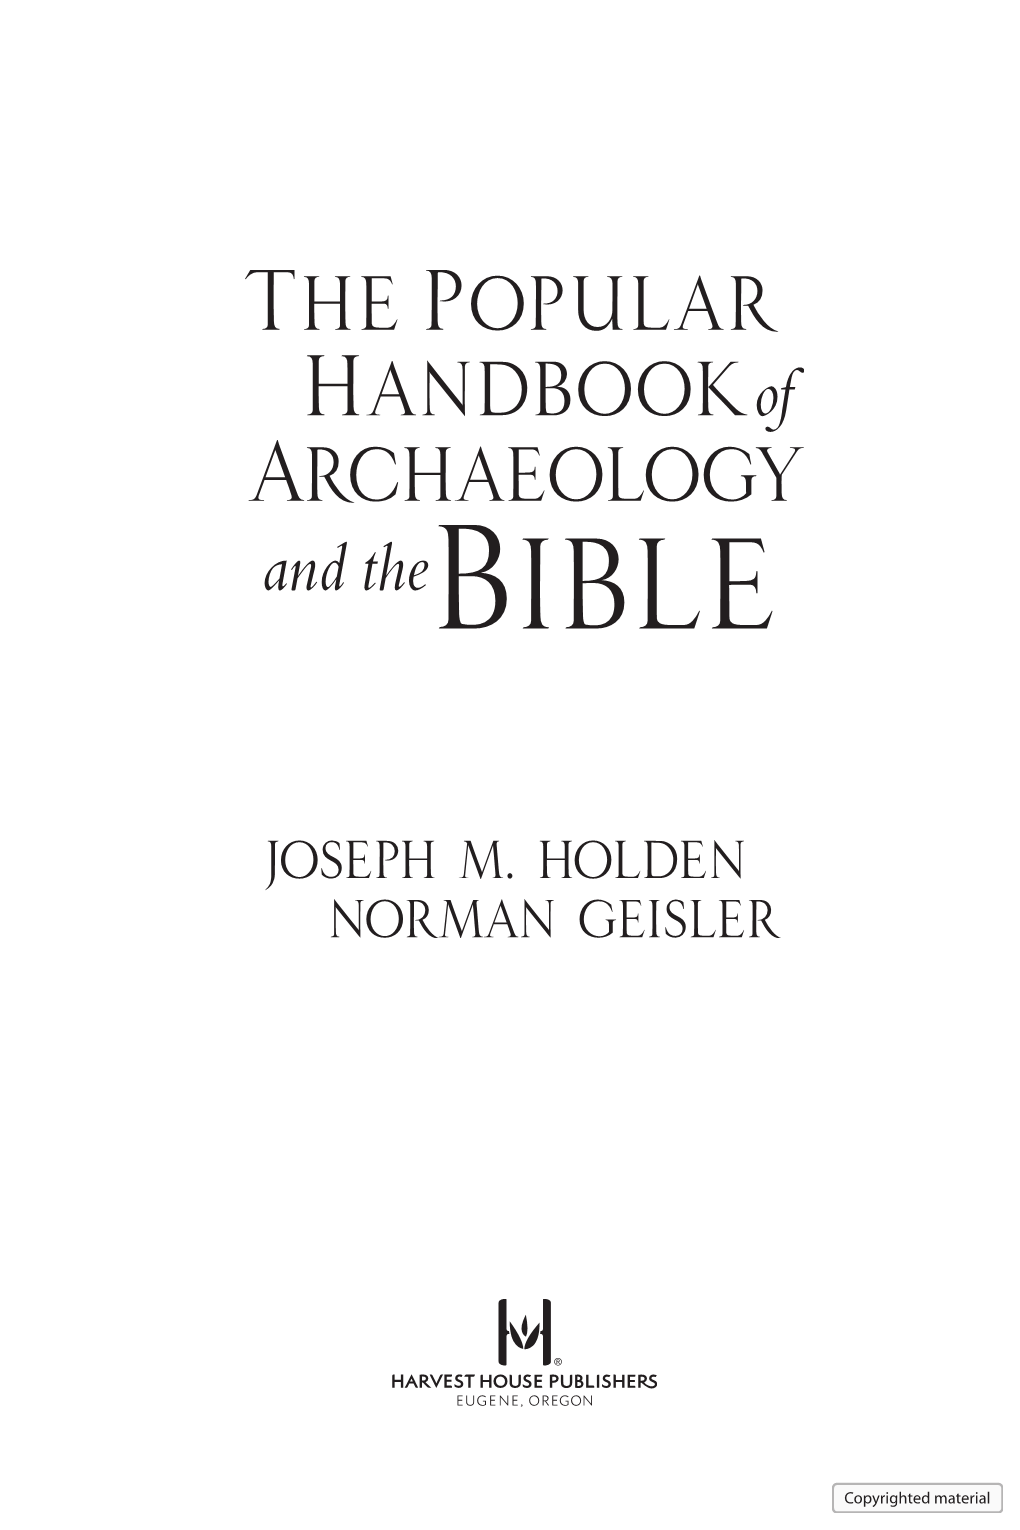 THE POPULAR HANDBOOK of ARCHAEOLOGY and the BIBLE Copyright © 2013 by Norman Geisler and Joseph M